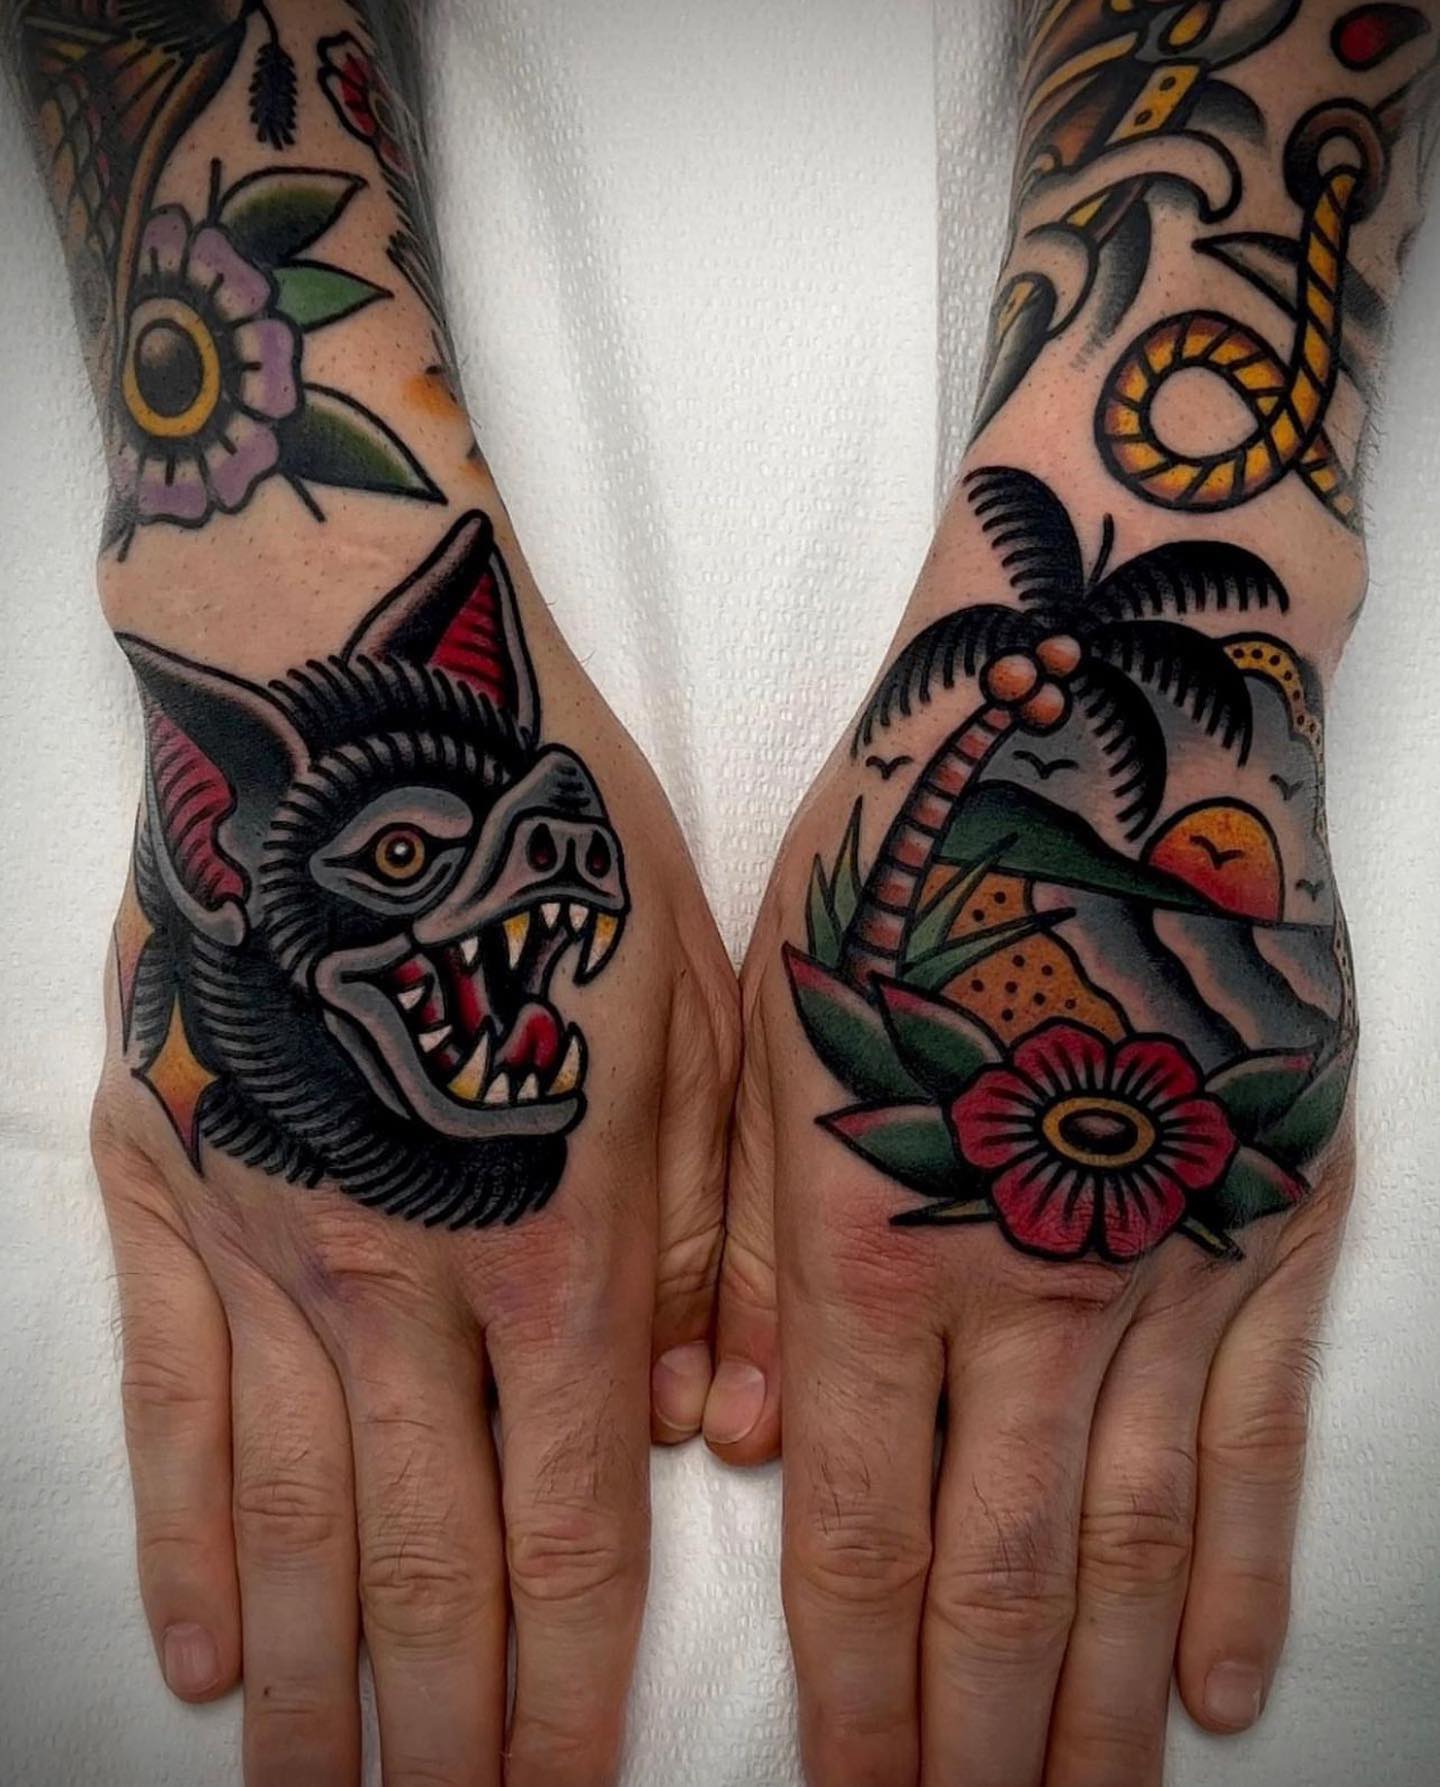 American Traditional Tattoos: History, Meanings, Artists & Designs